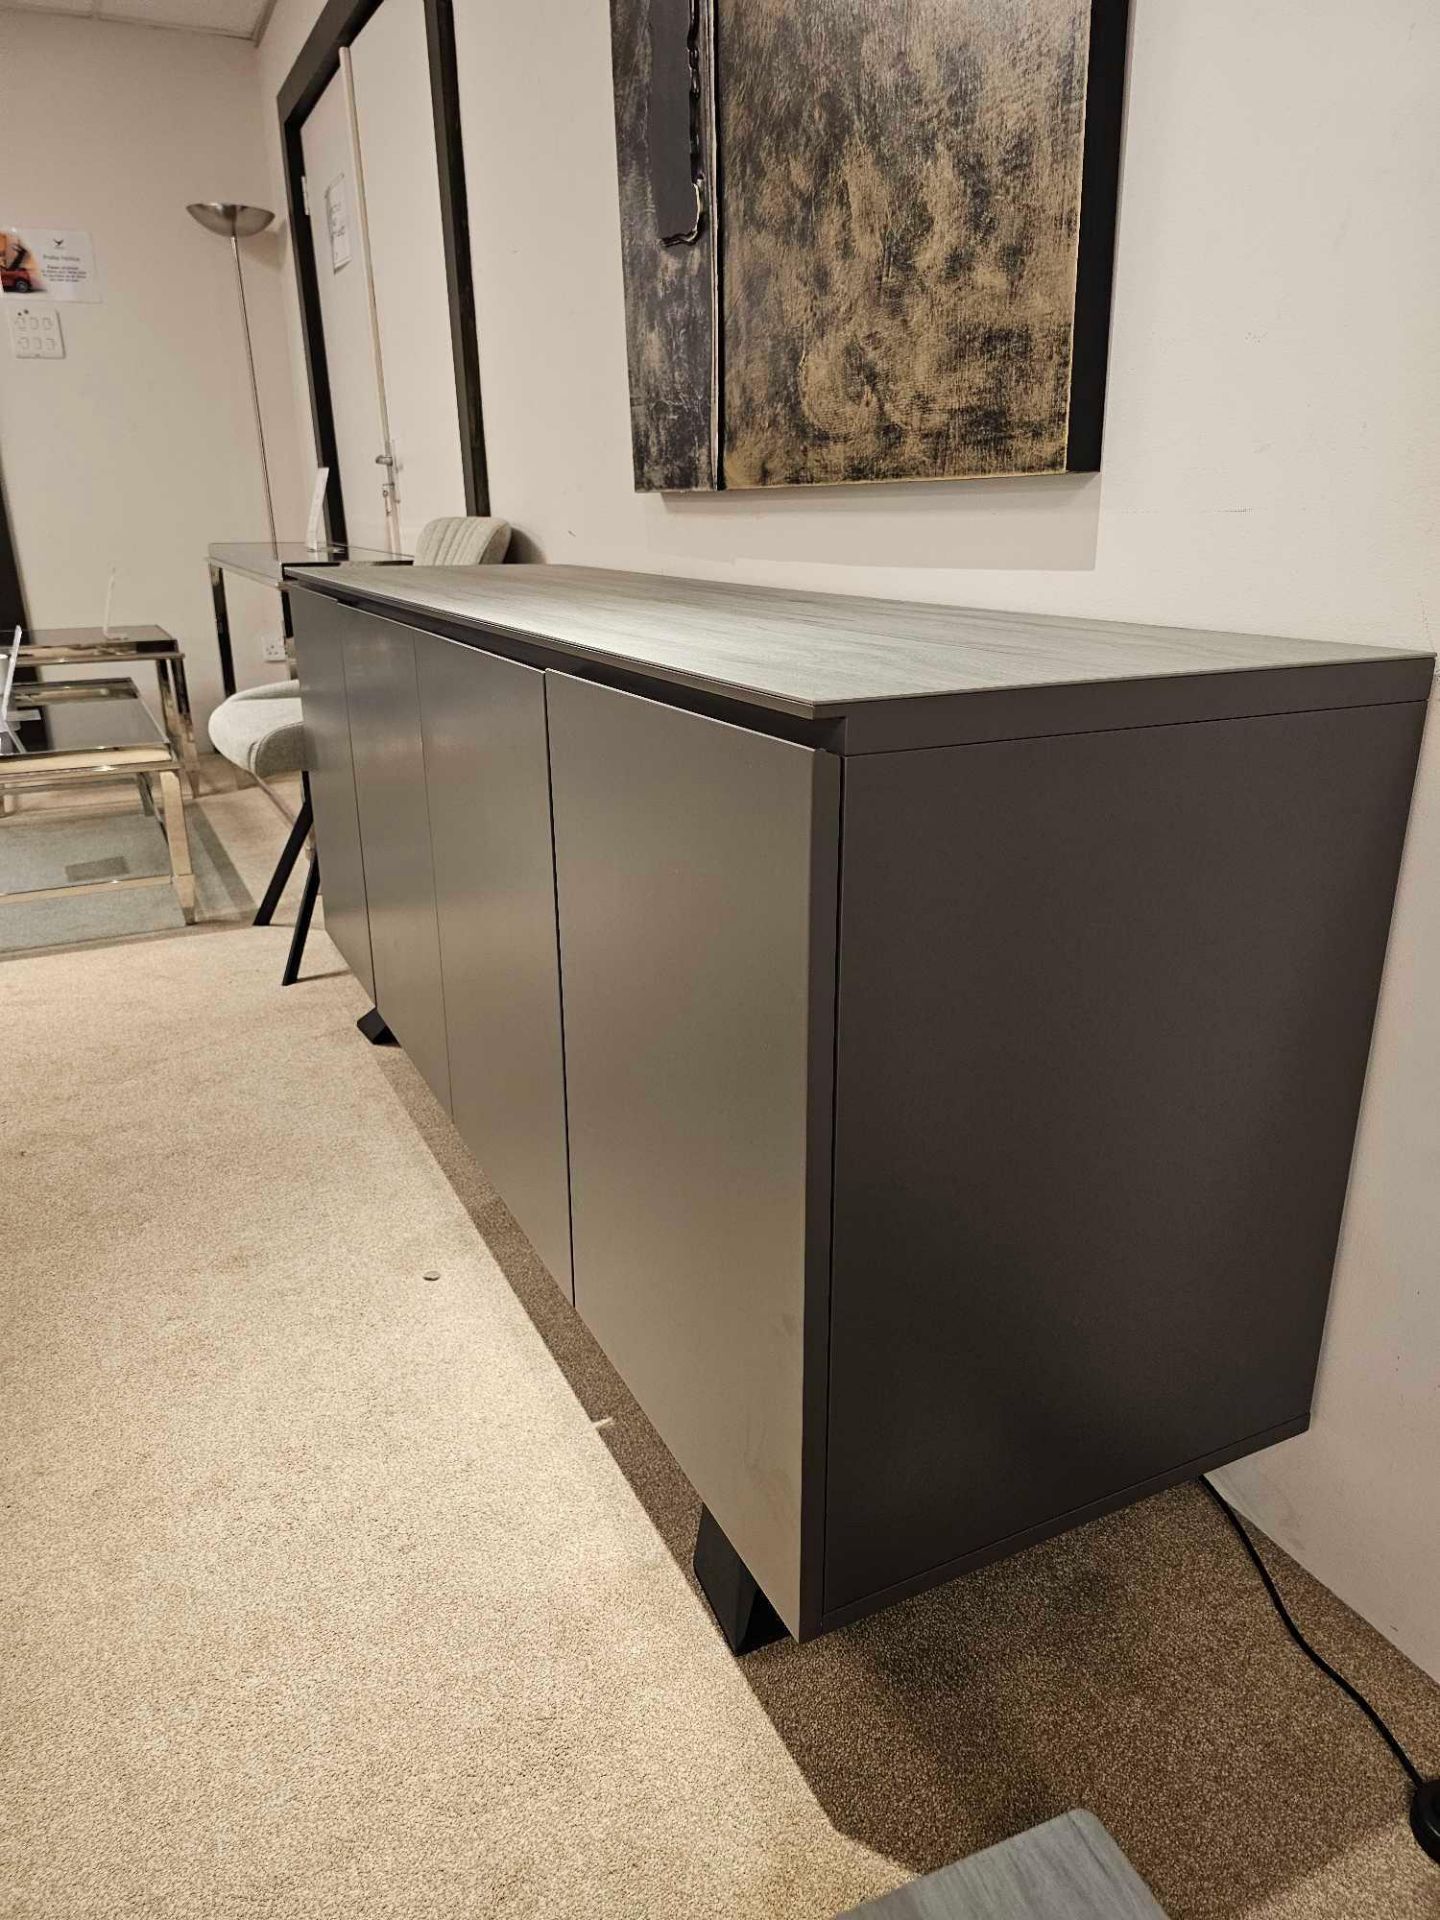 Spartan Sideboard by Kesterport The Spartan Four Door Sideboard provides is striking as a stand - Image 10 of 12